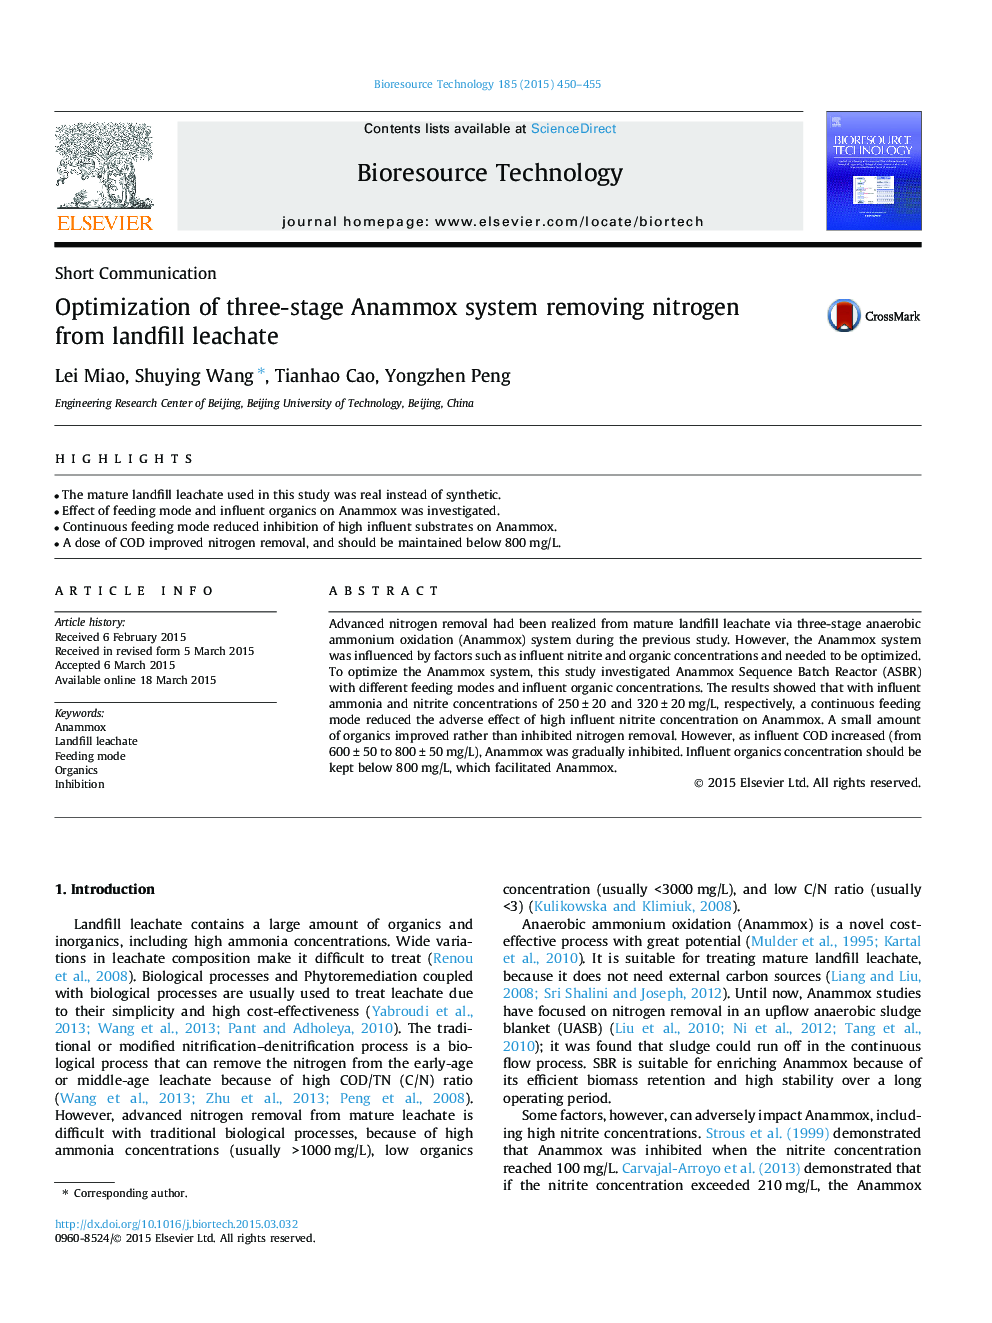 Optimization of three-stage Anammox system removing nitrogen from landfill leachate